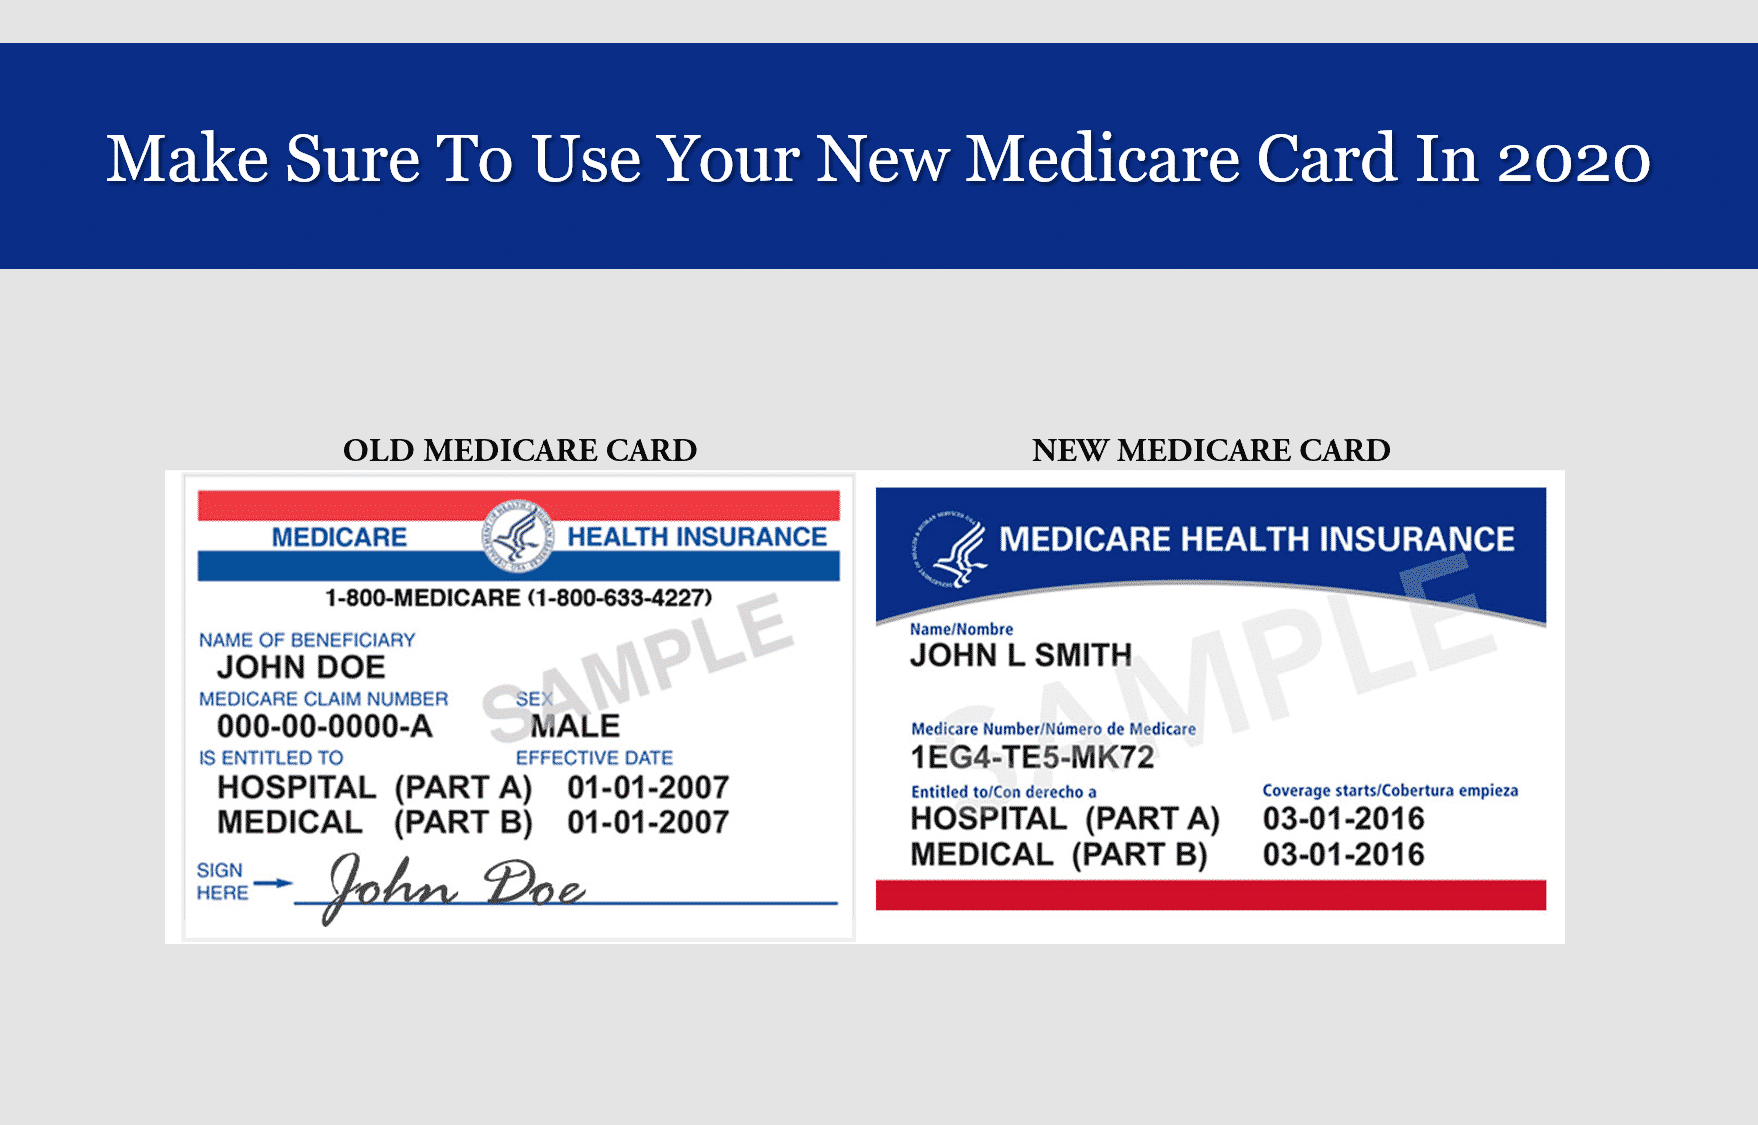 Make Sure To Use Your New Medicare Card In 2020